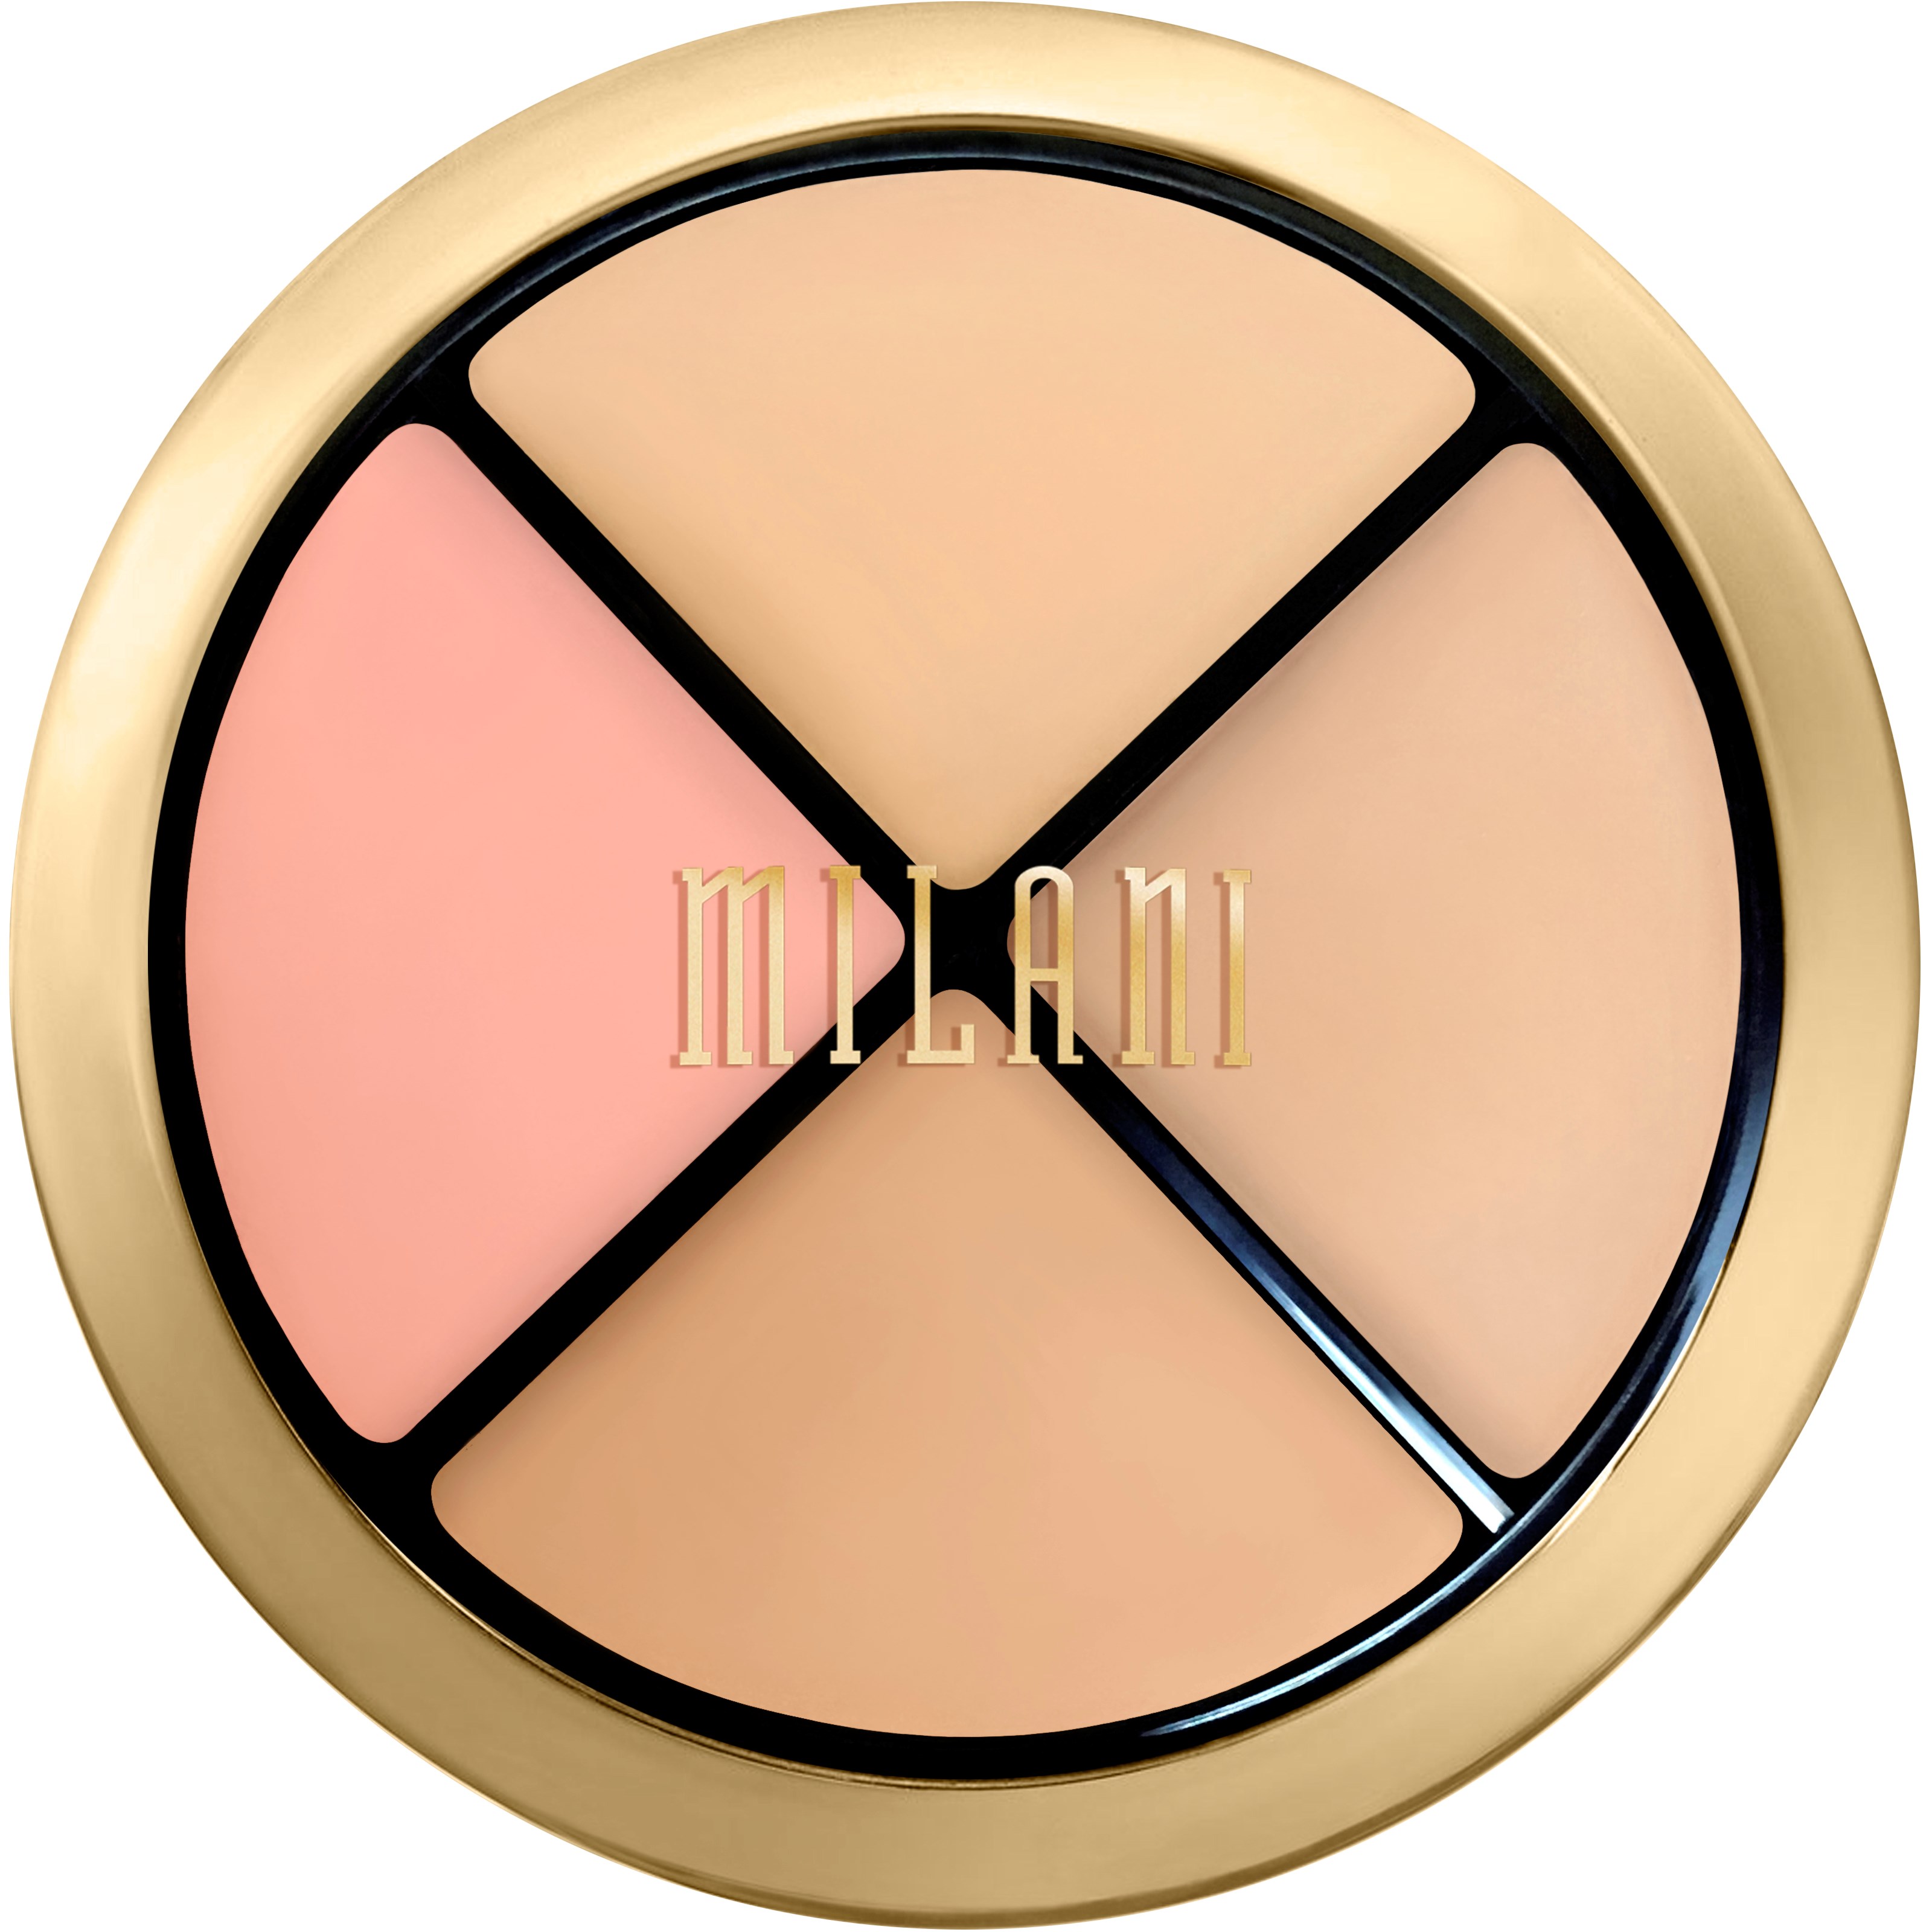 Milani Conceal + Perfect All In One Concealer Kit - 01 Fair to Light